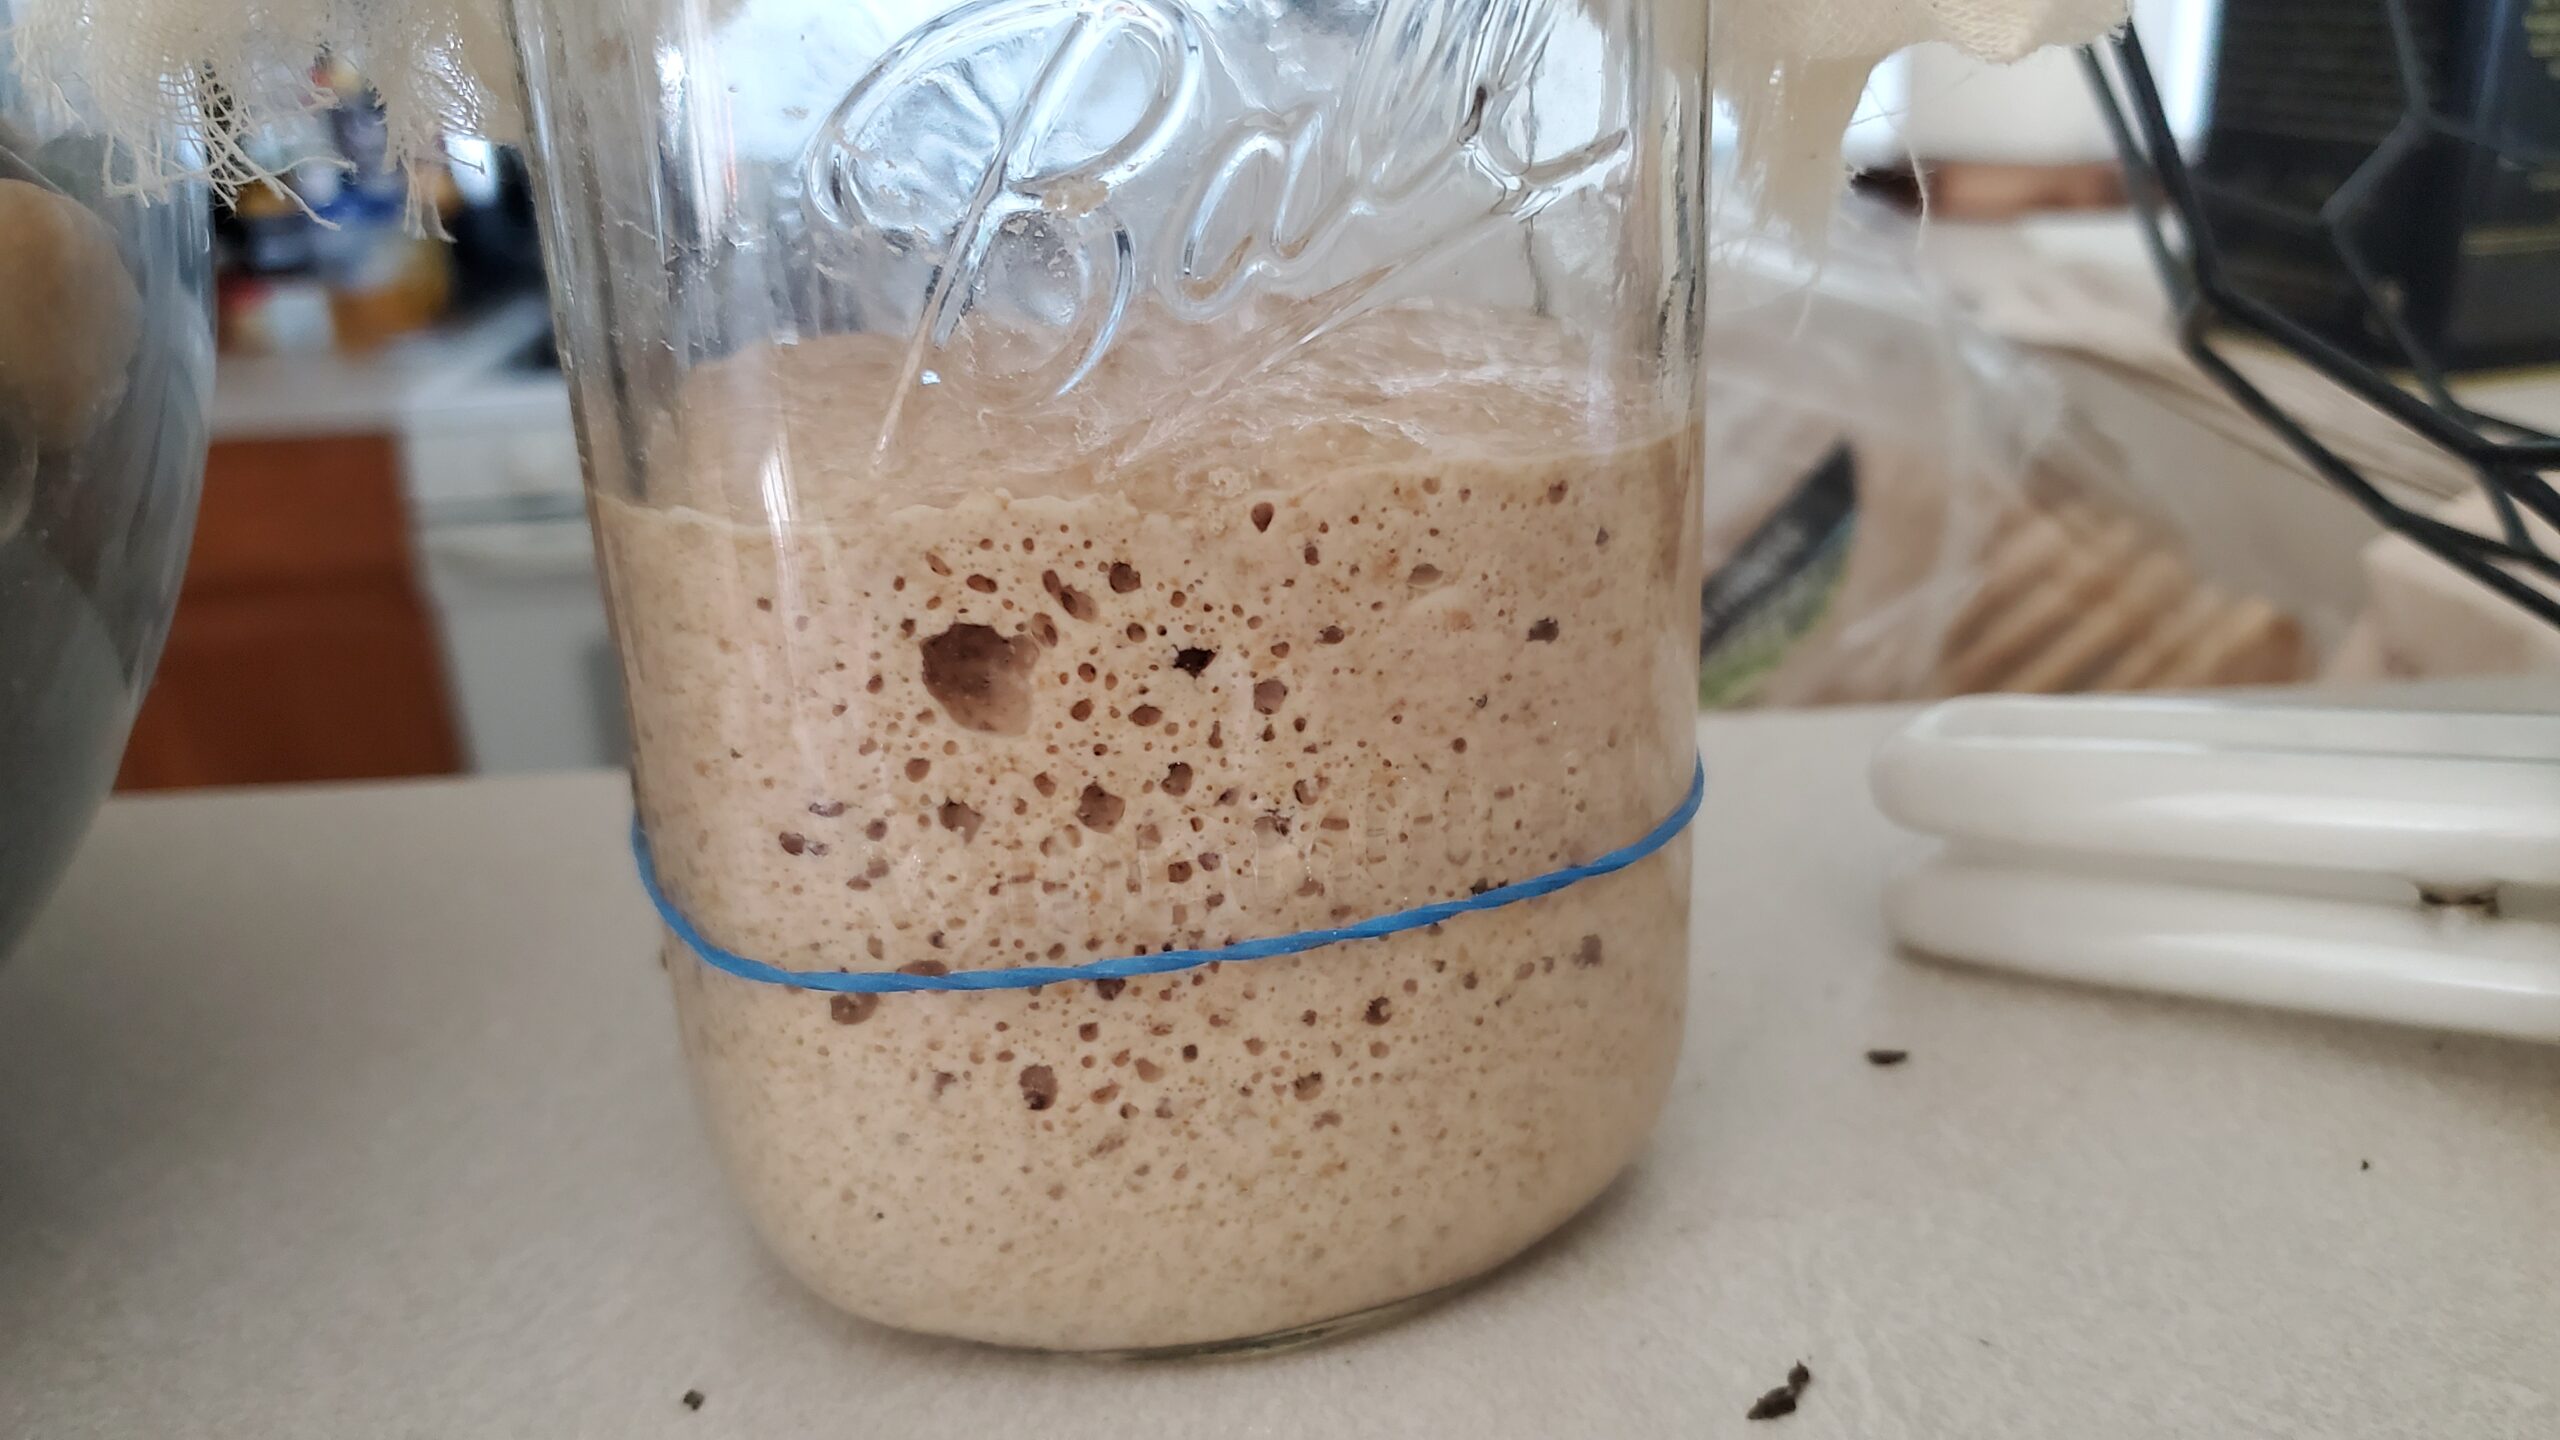 Close-up photo of sourdough starter in a Ball mason jar. A blue rubberband around the jar marks the starter's starting level. It has risen twice as heigh and is full of bubbles.